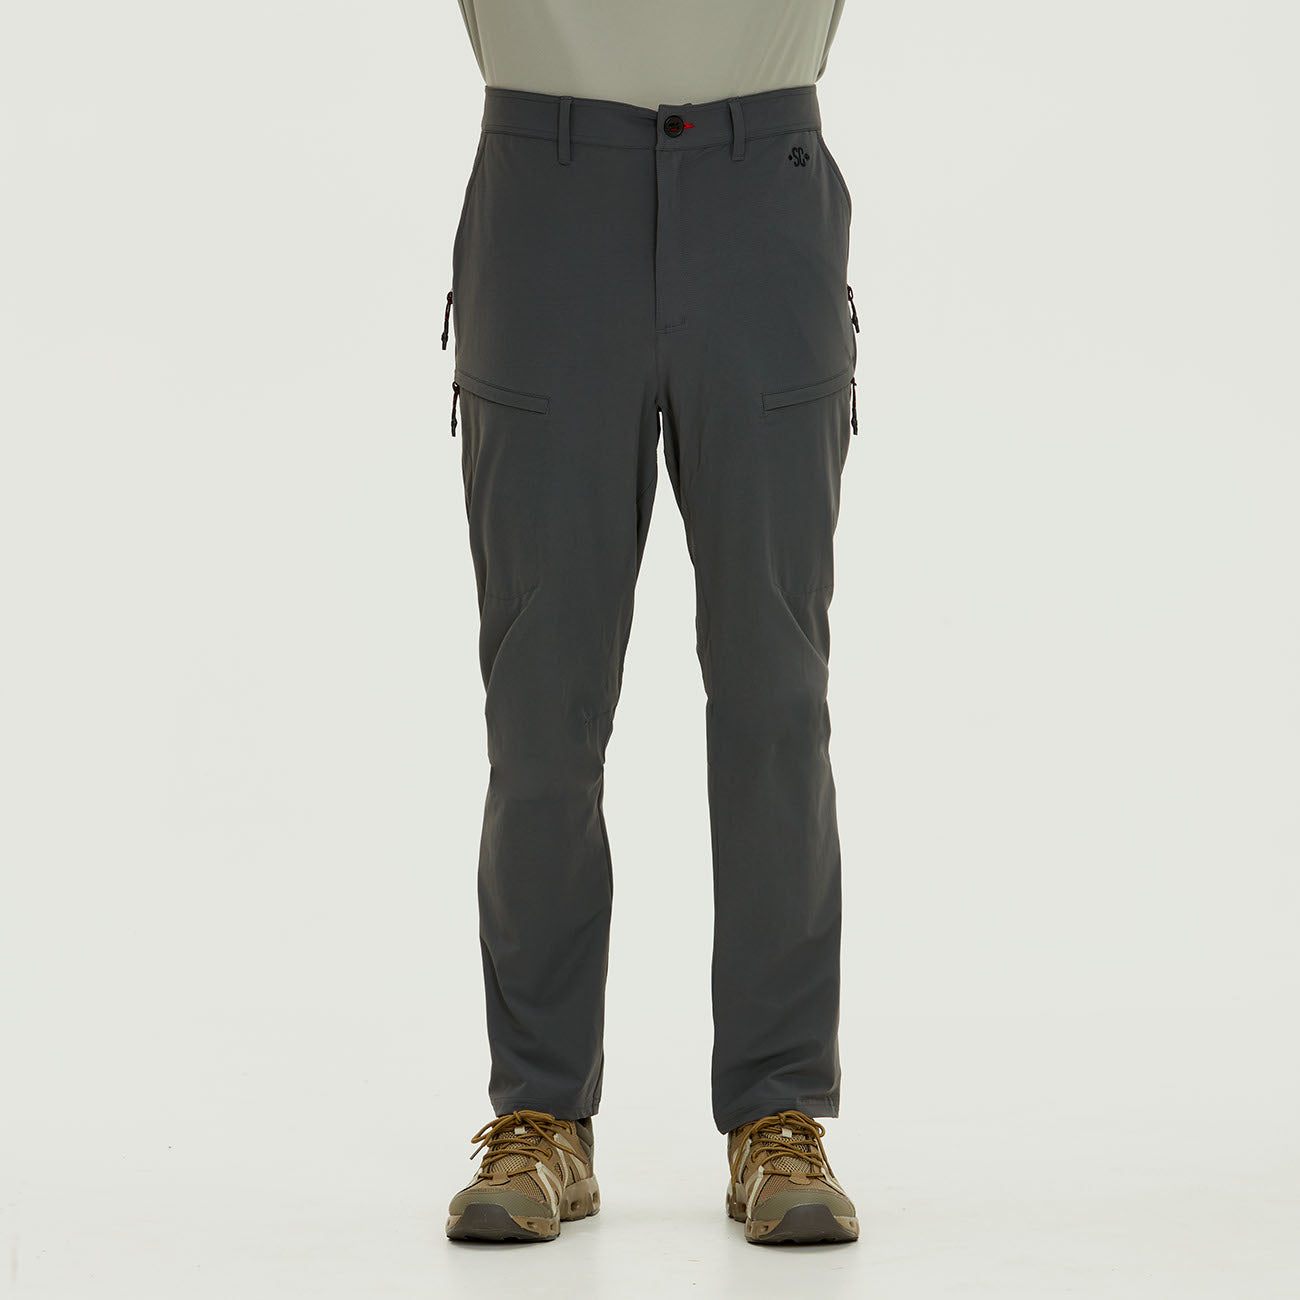 Men's Fraser hiking or fishing pants – Sportchief